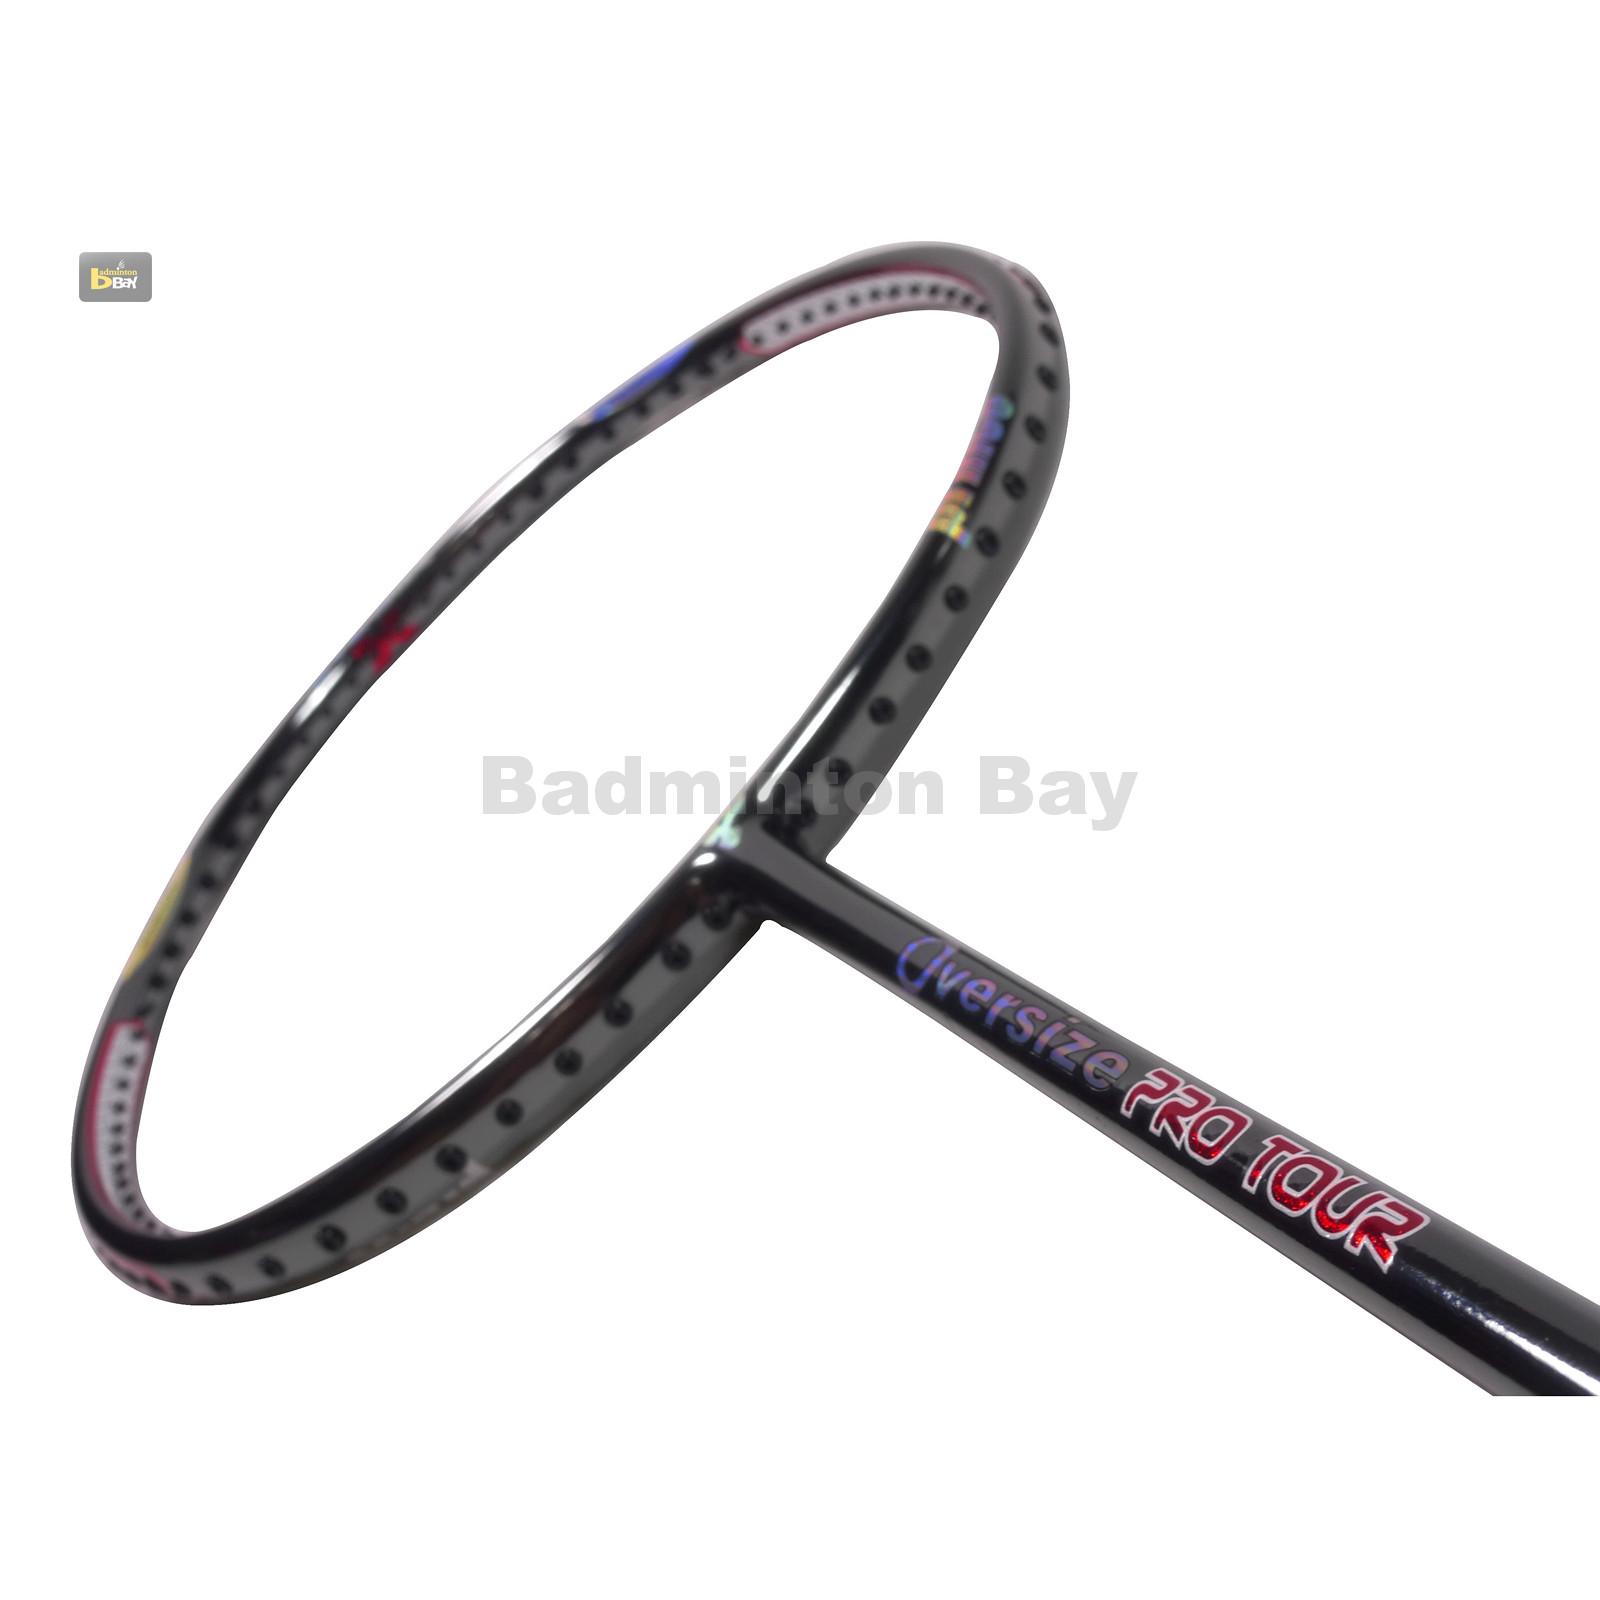 6 Shuttles Prince PRO Nano 75 Graphite Badminton Racket Series with Full Protective Cover Various Options